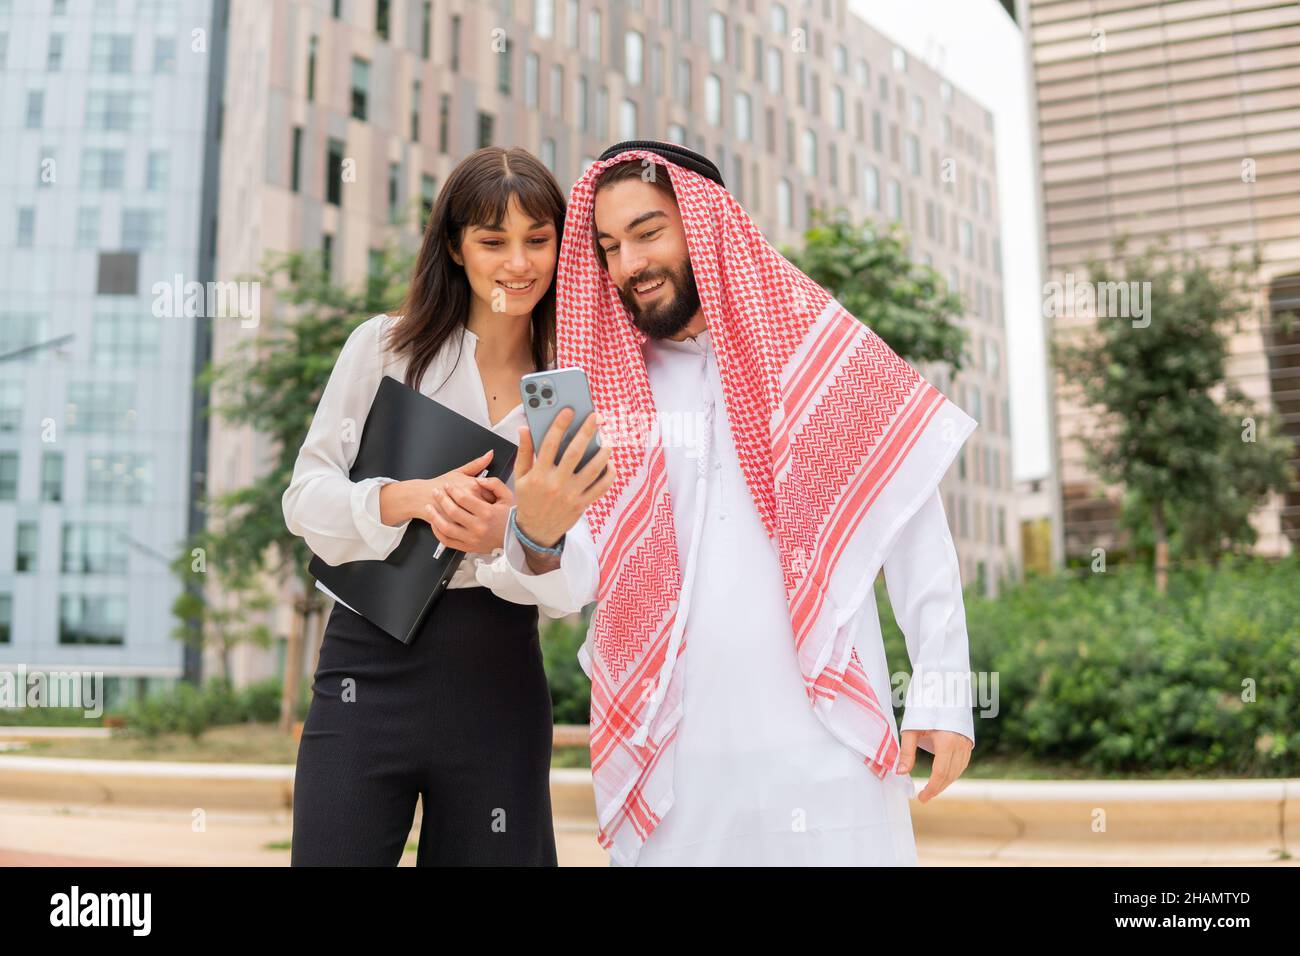 Smiling arab businessman in traditional wear showing video on smartphone to caucasian businesswoman at business meeting outdoors, saudi man and his female assistant looking at mobile phone outside Stock Photo